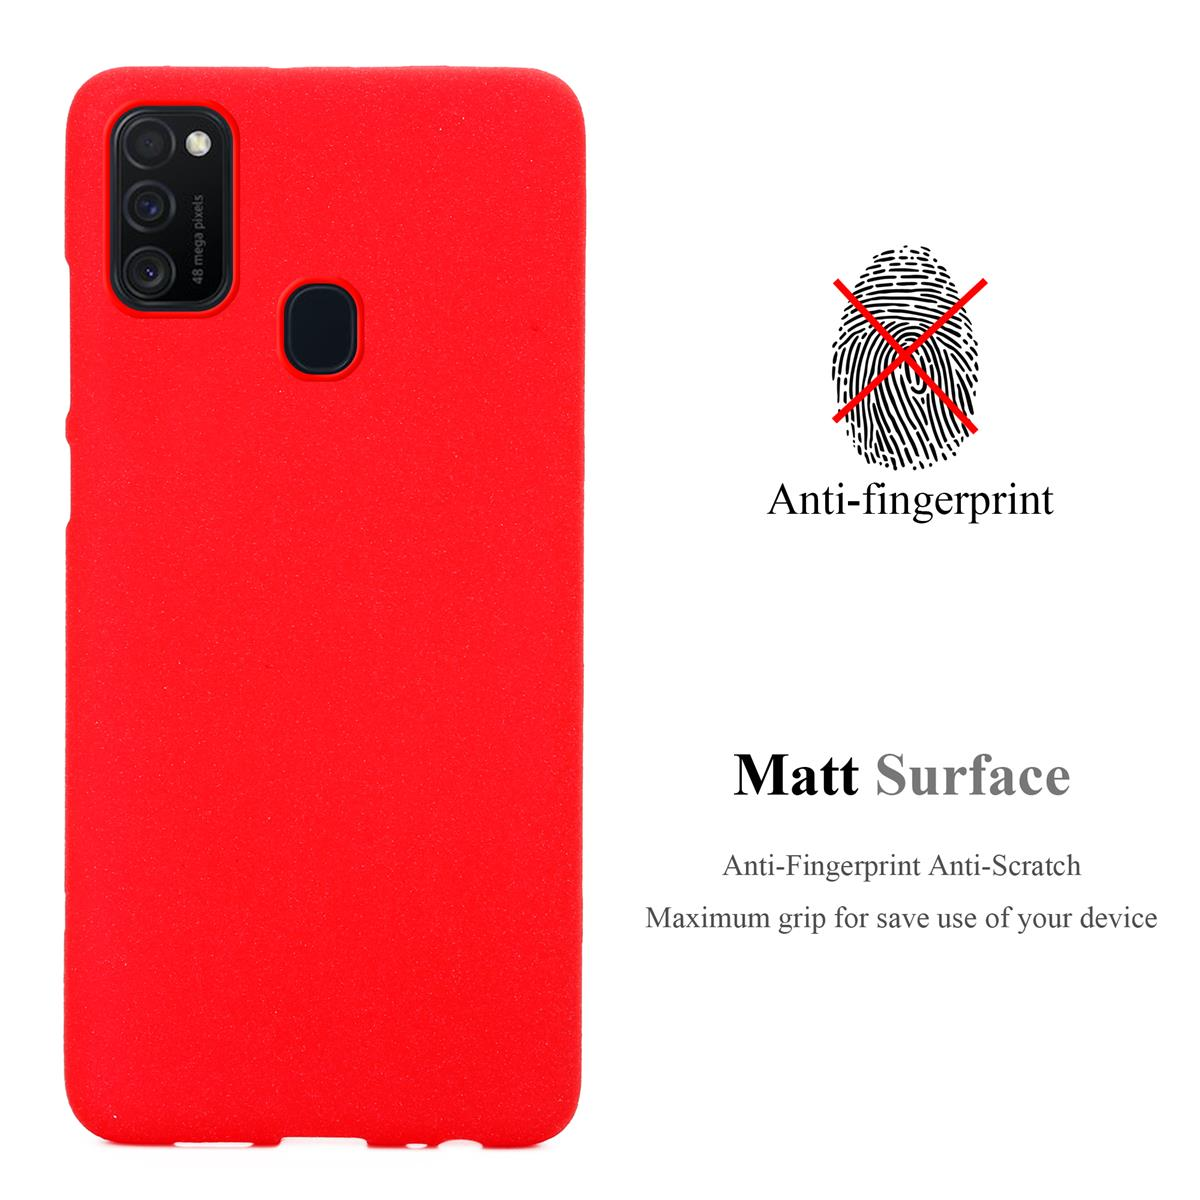 Samsung, Frosted / Galaxy CADORABO Schutzhülle, ROT M21 FROST TPU M30s, Backcover,